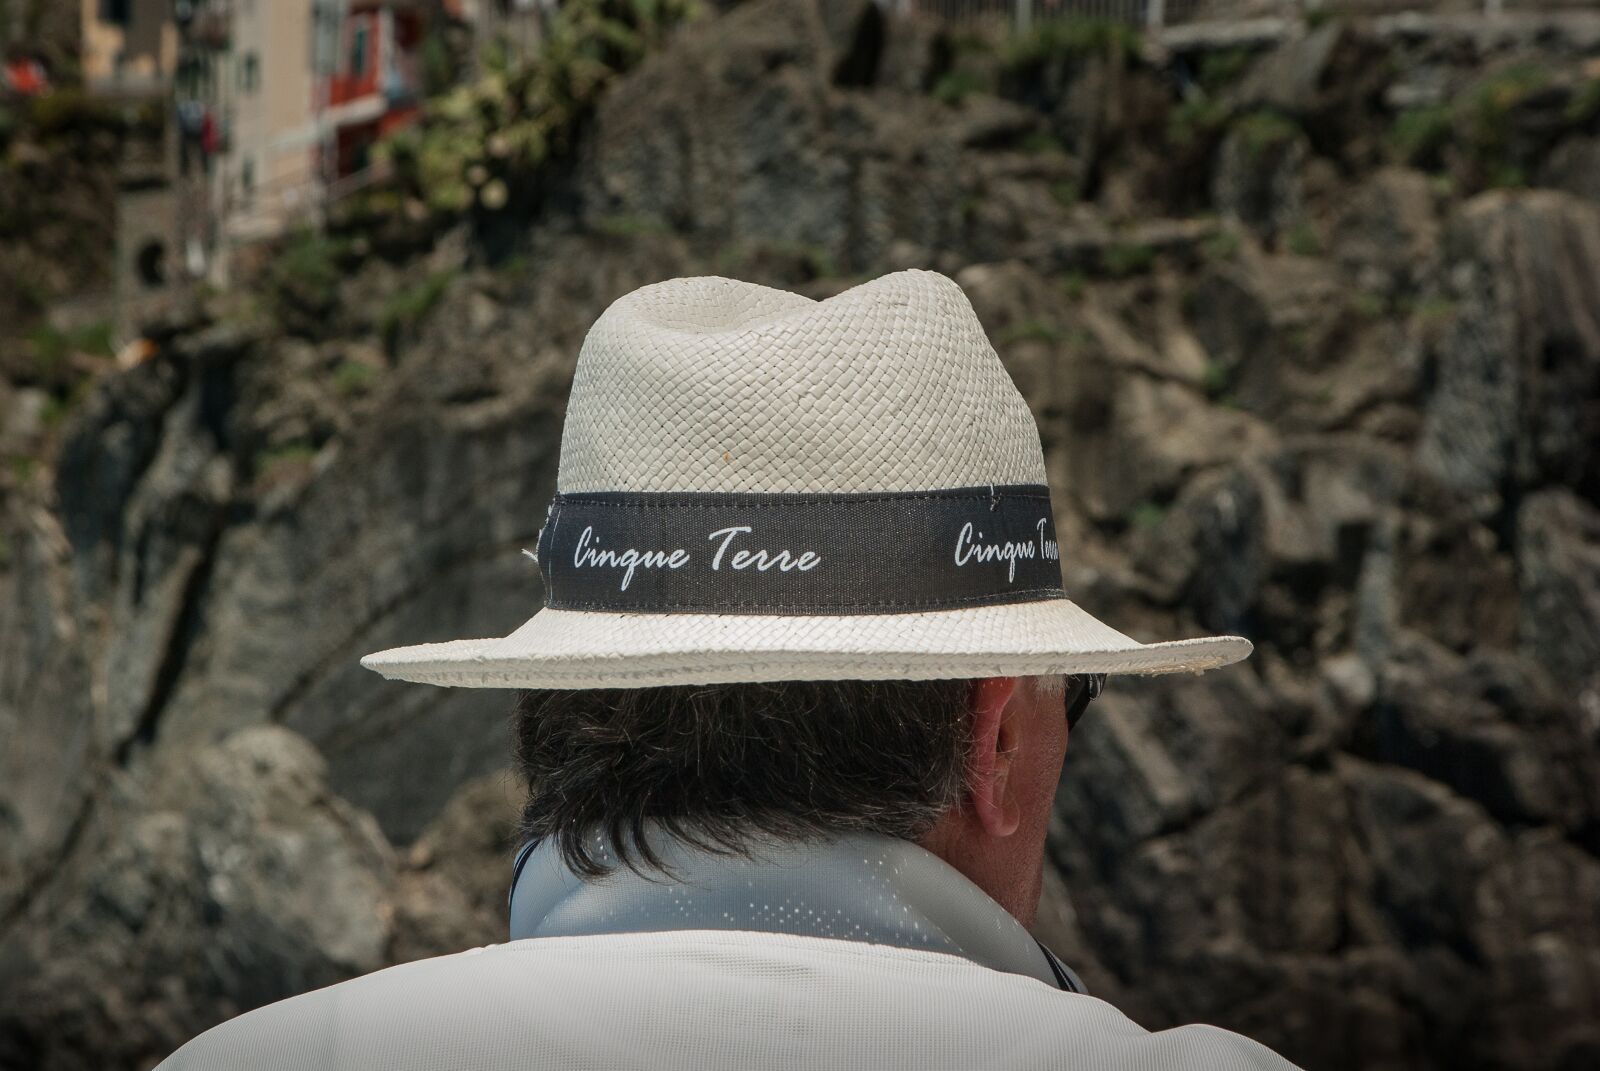 Pentax K10D sample photo. Cinque terre, hat, straw photography